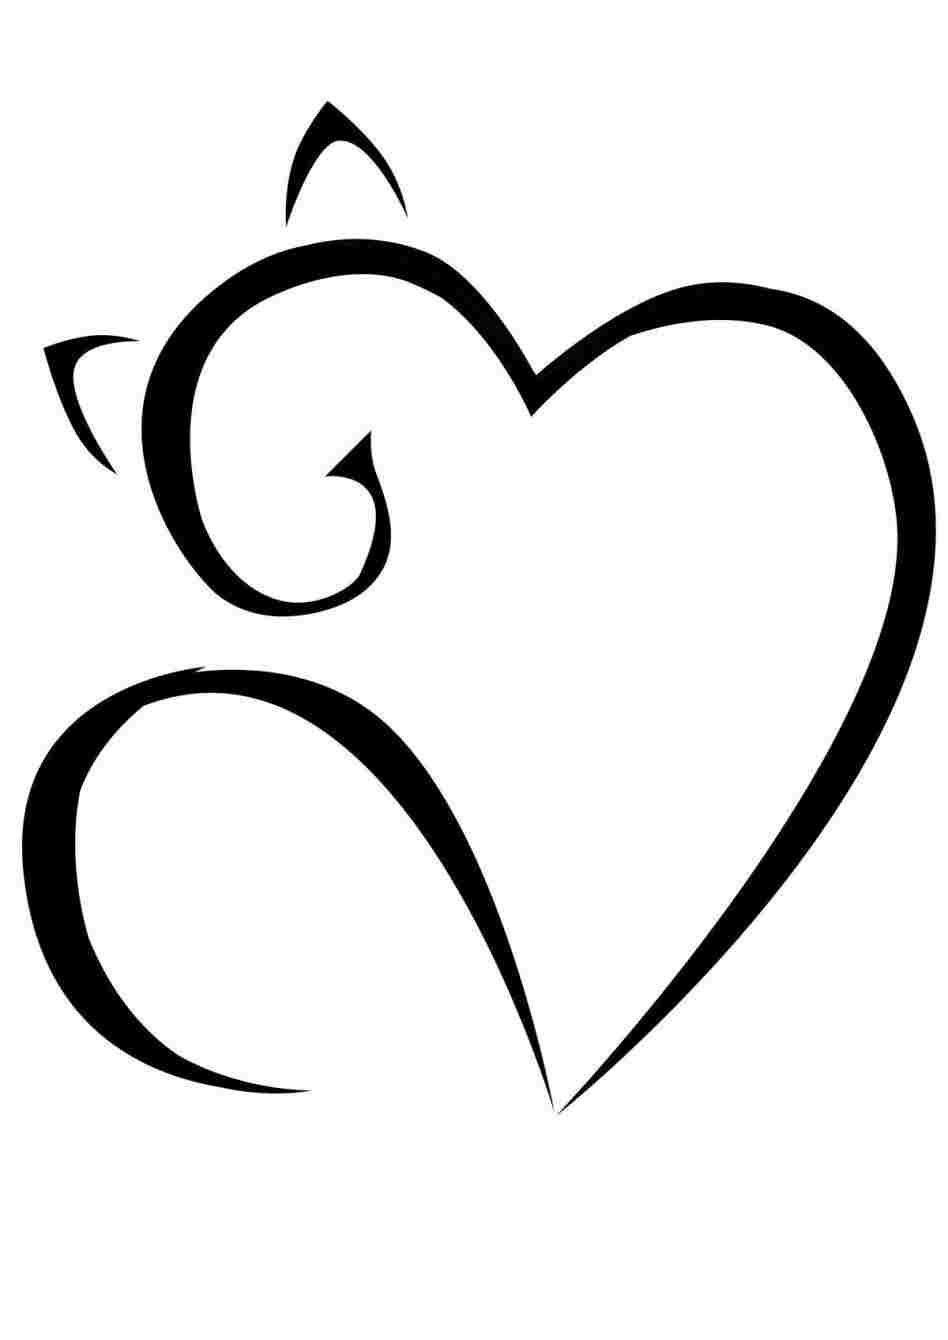 Cute Heart Drawings | Free download on ClipArtMag